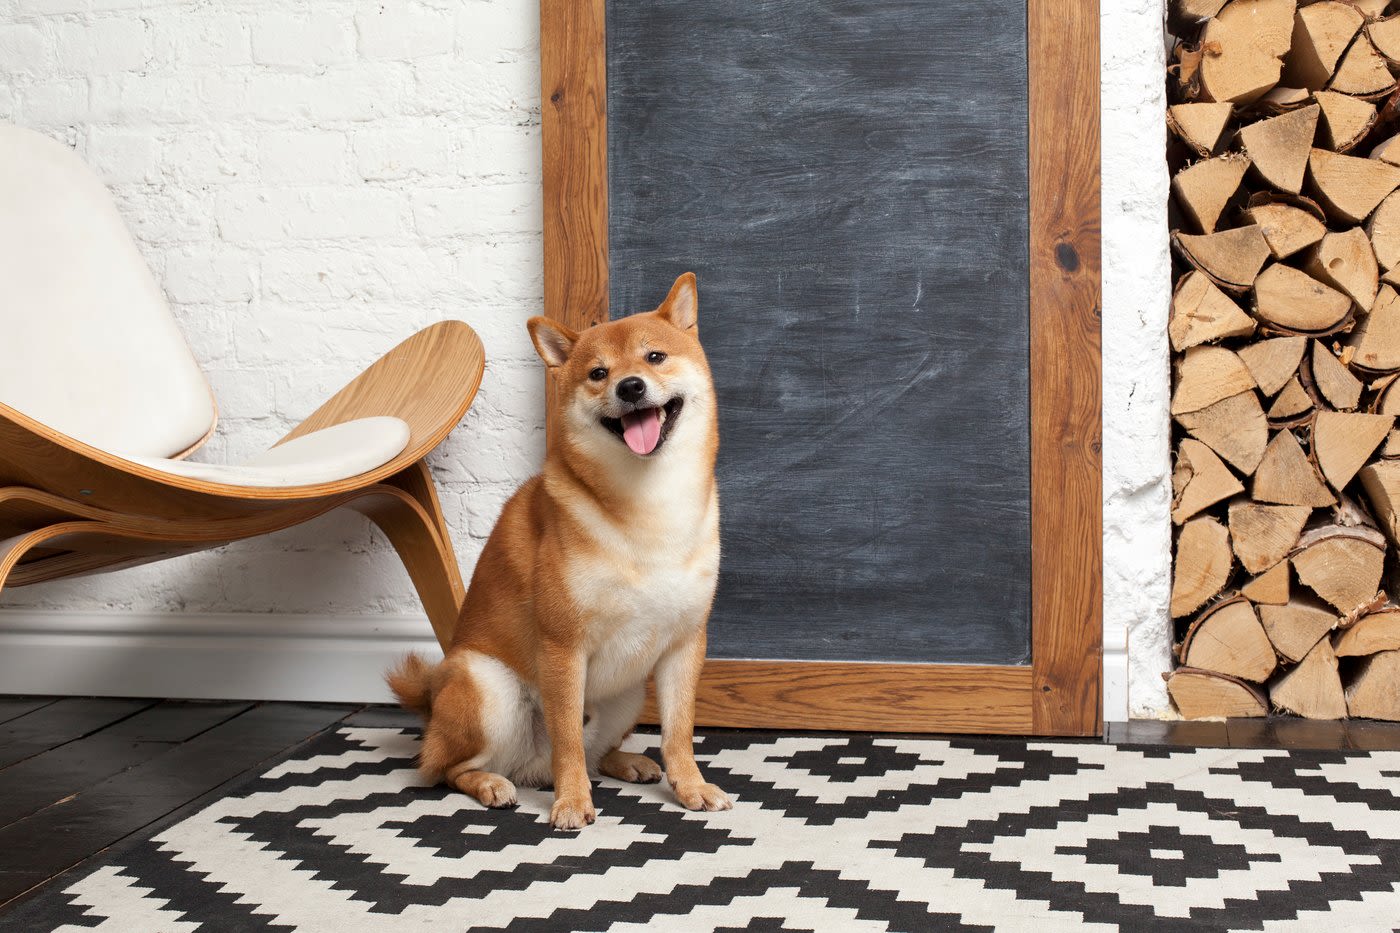 Can Investing $1,000 in Shiba Inu Make You a Millionaire?